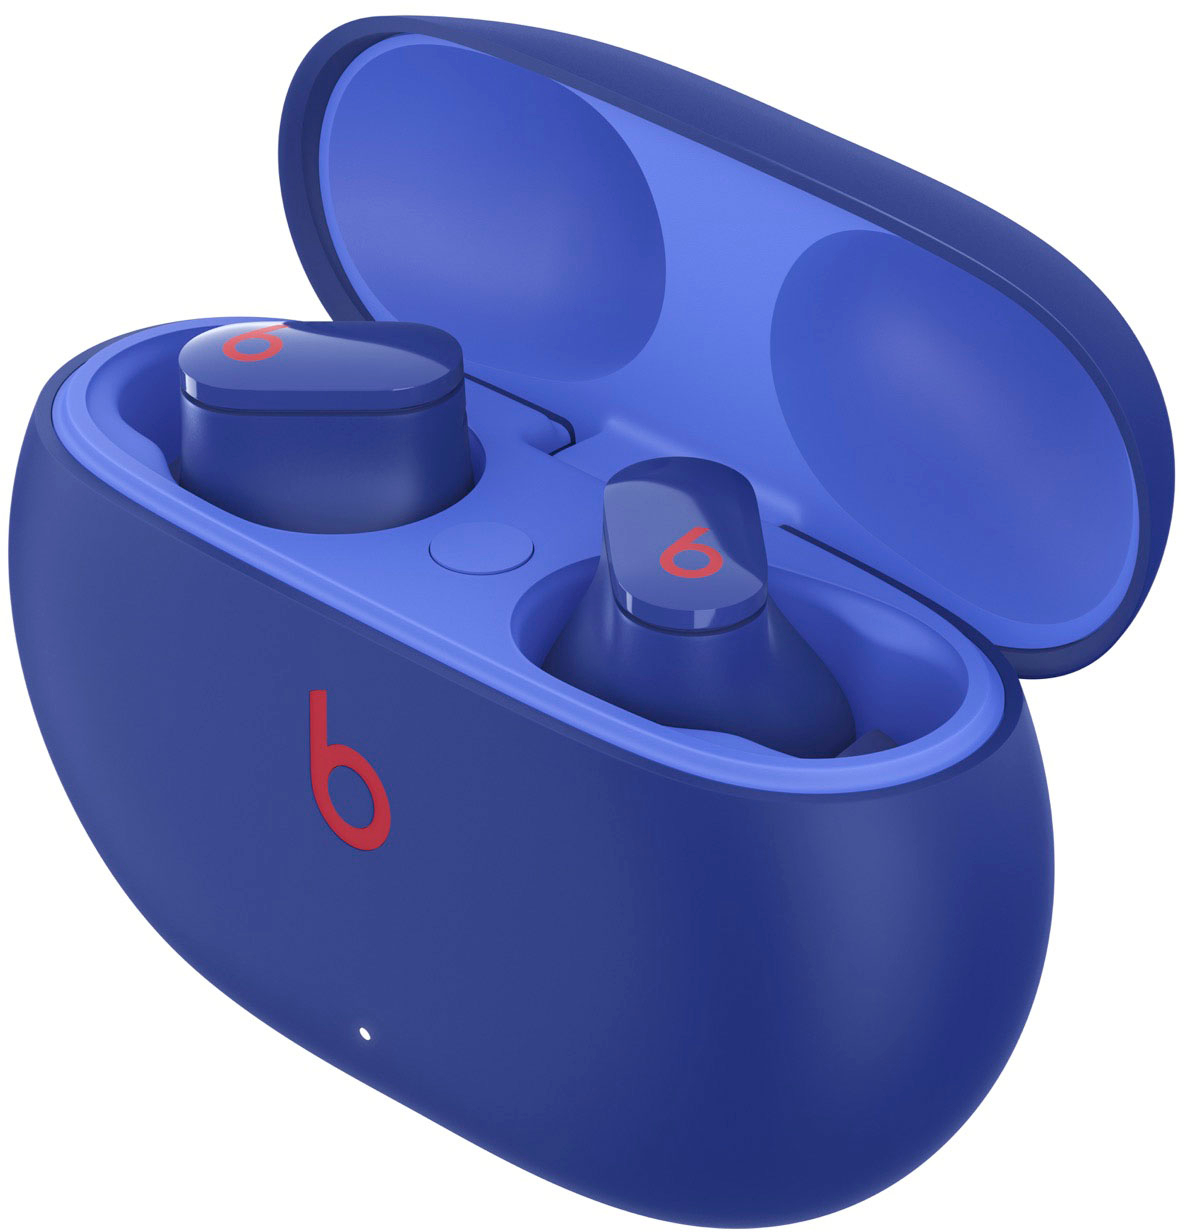 Beats Studio Buds are Noise-Cancelling Earbuds Designed to Replace